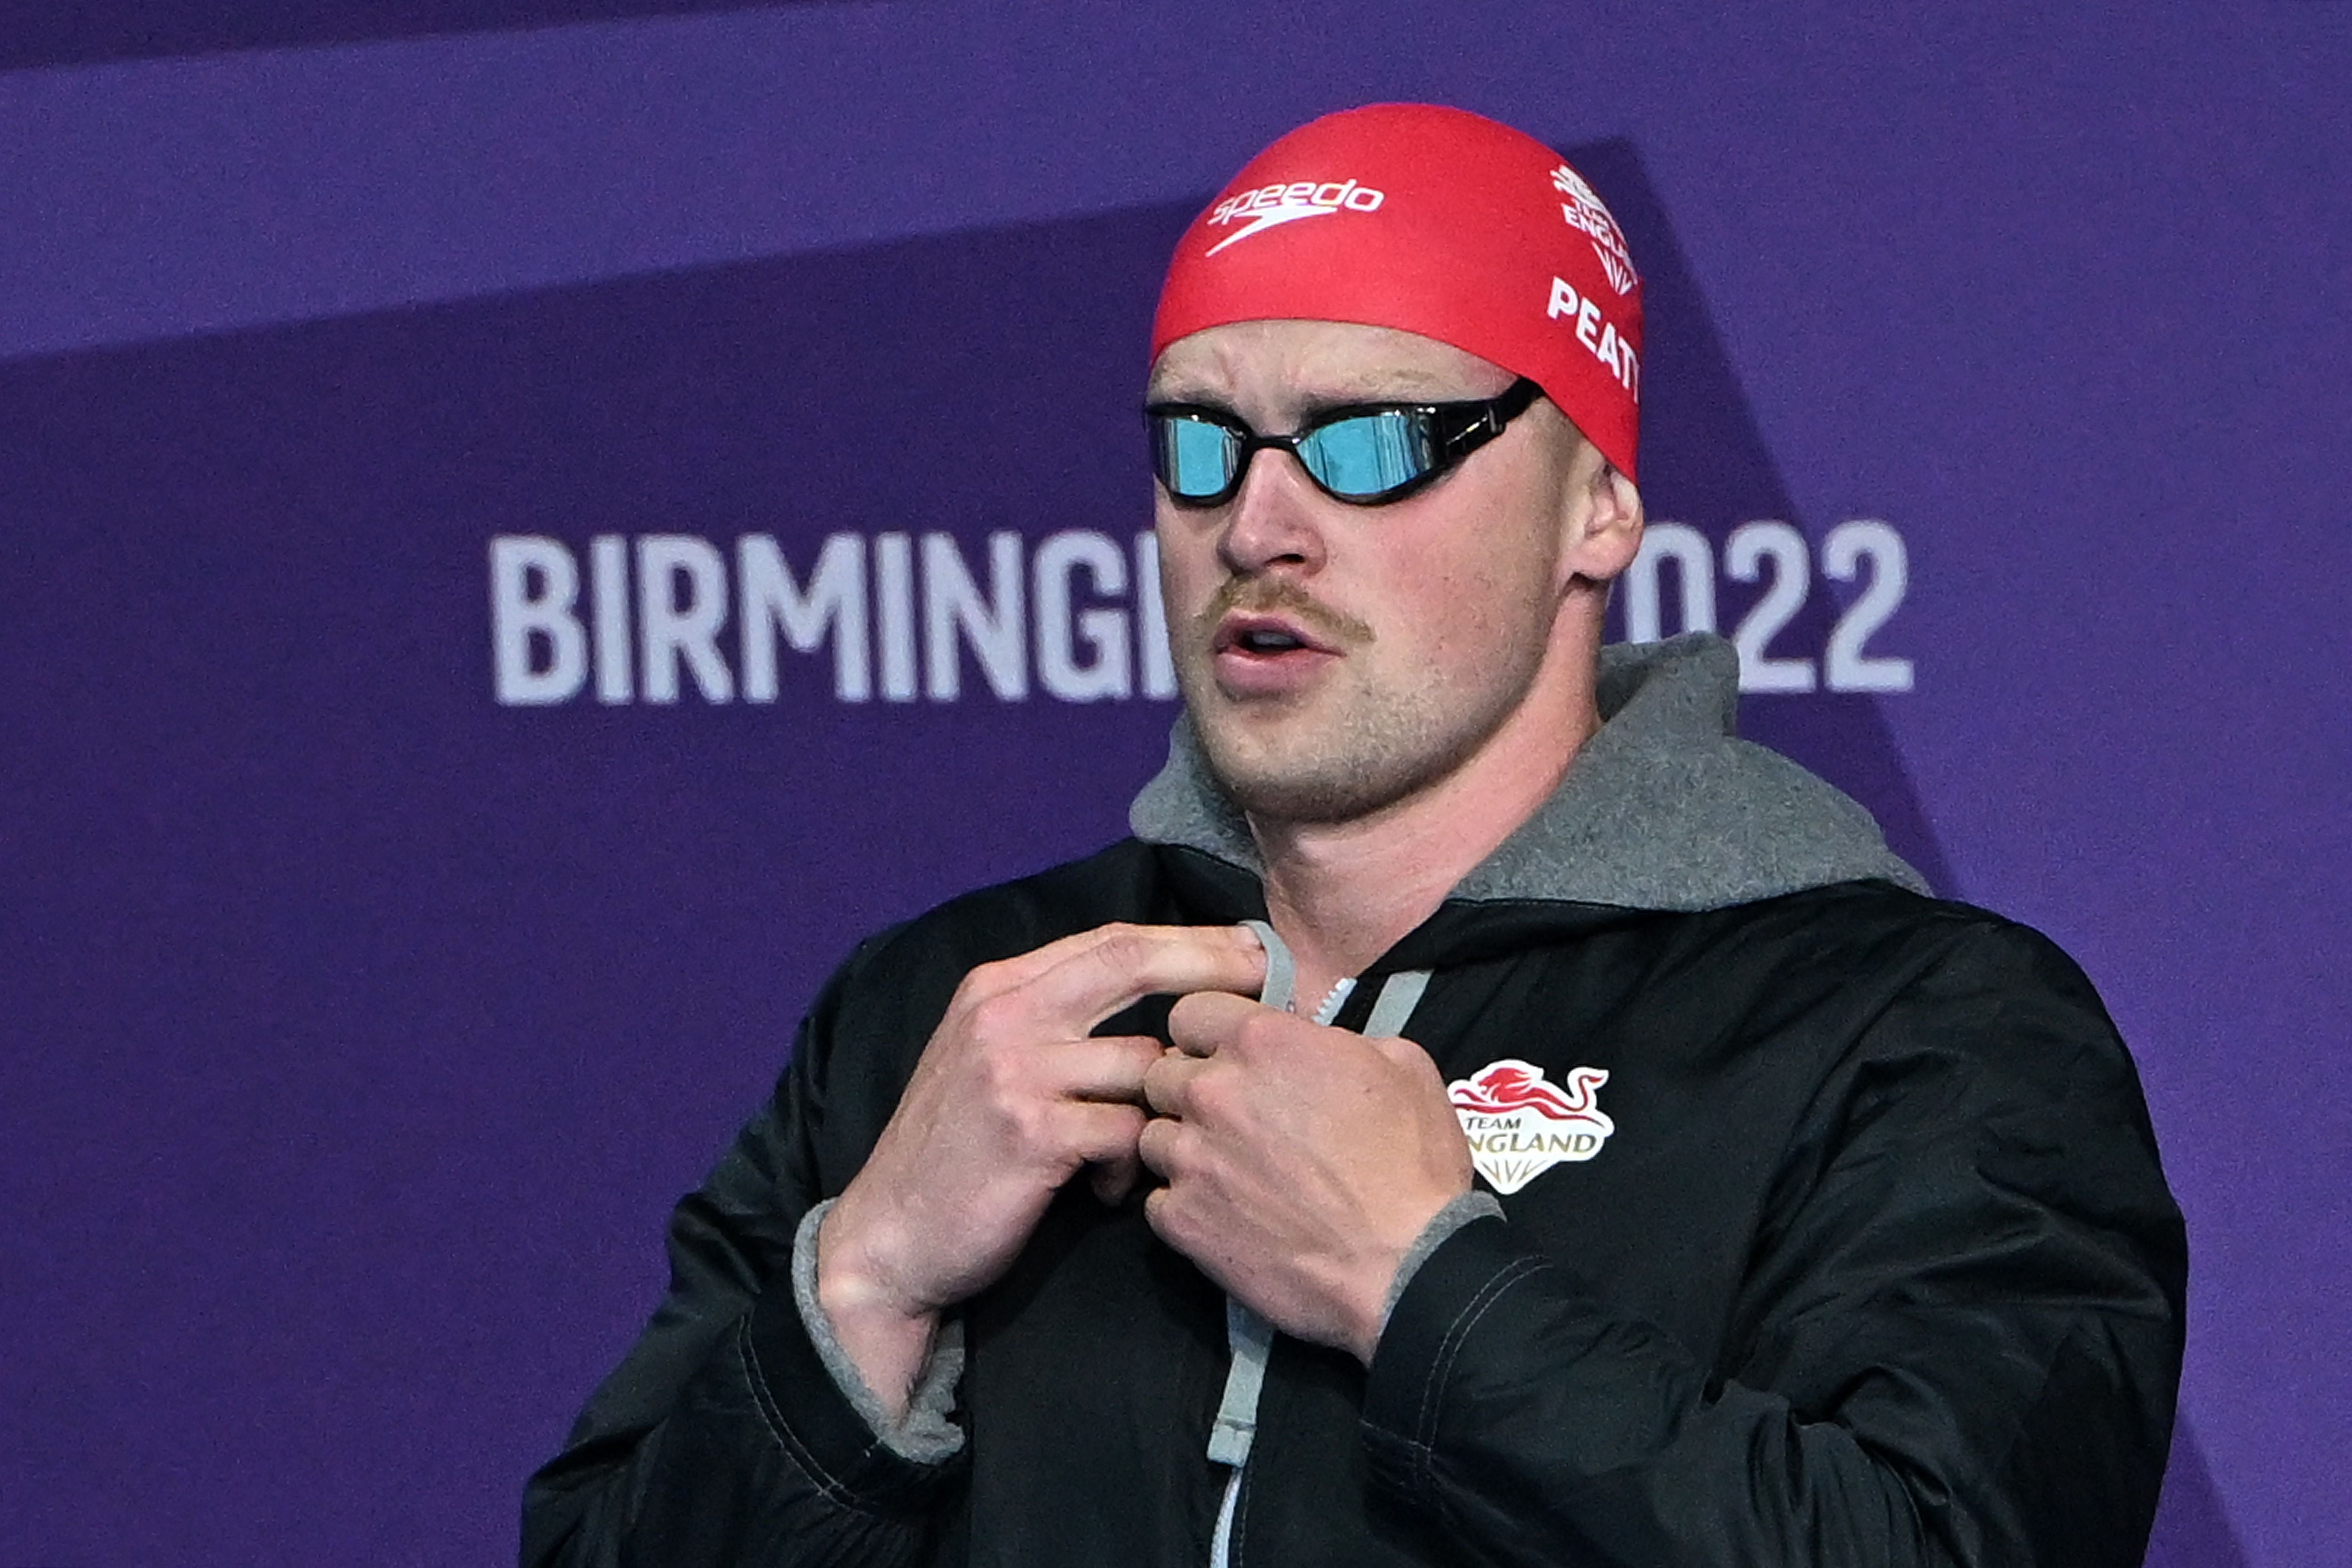 Adam Peaty suggested he was more focused on the Olympics